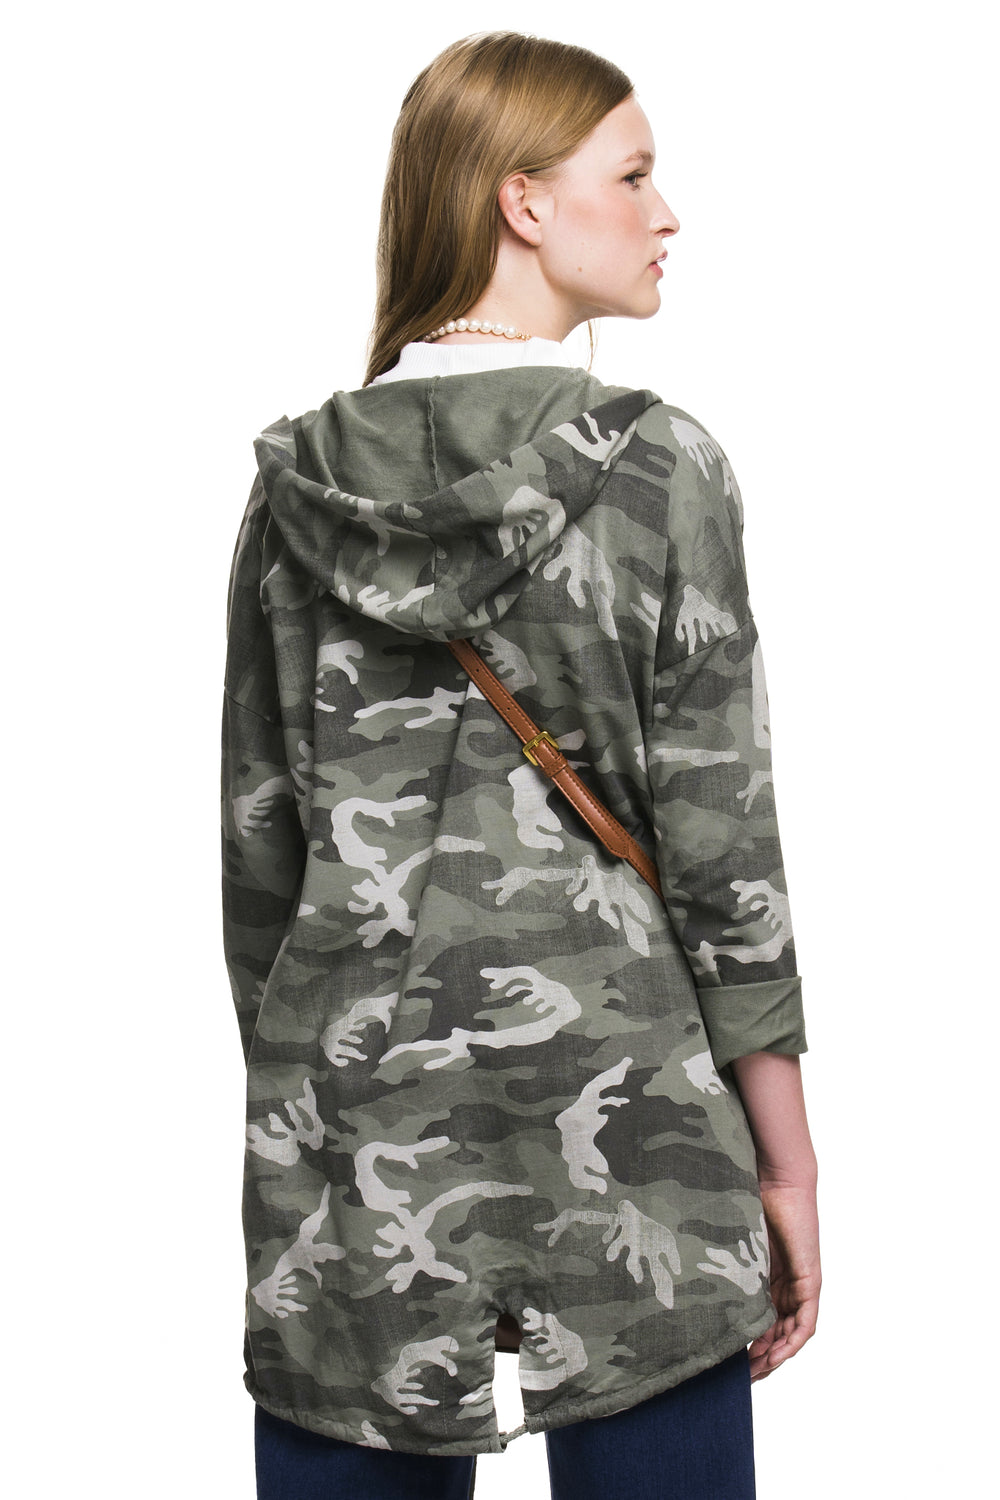 In Plain Sight Camouflage Hooded Open Cardigan - Expressive Collective CO.